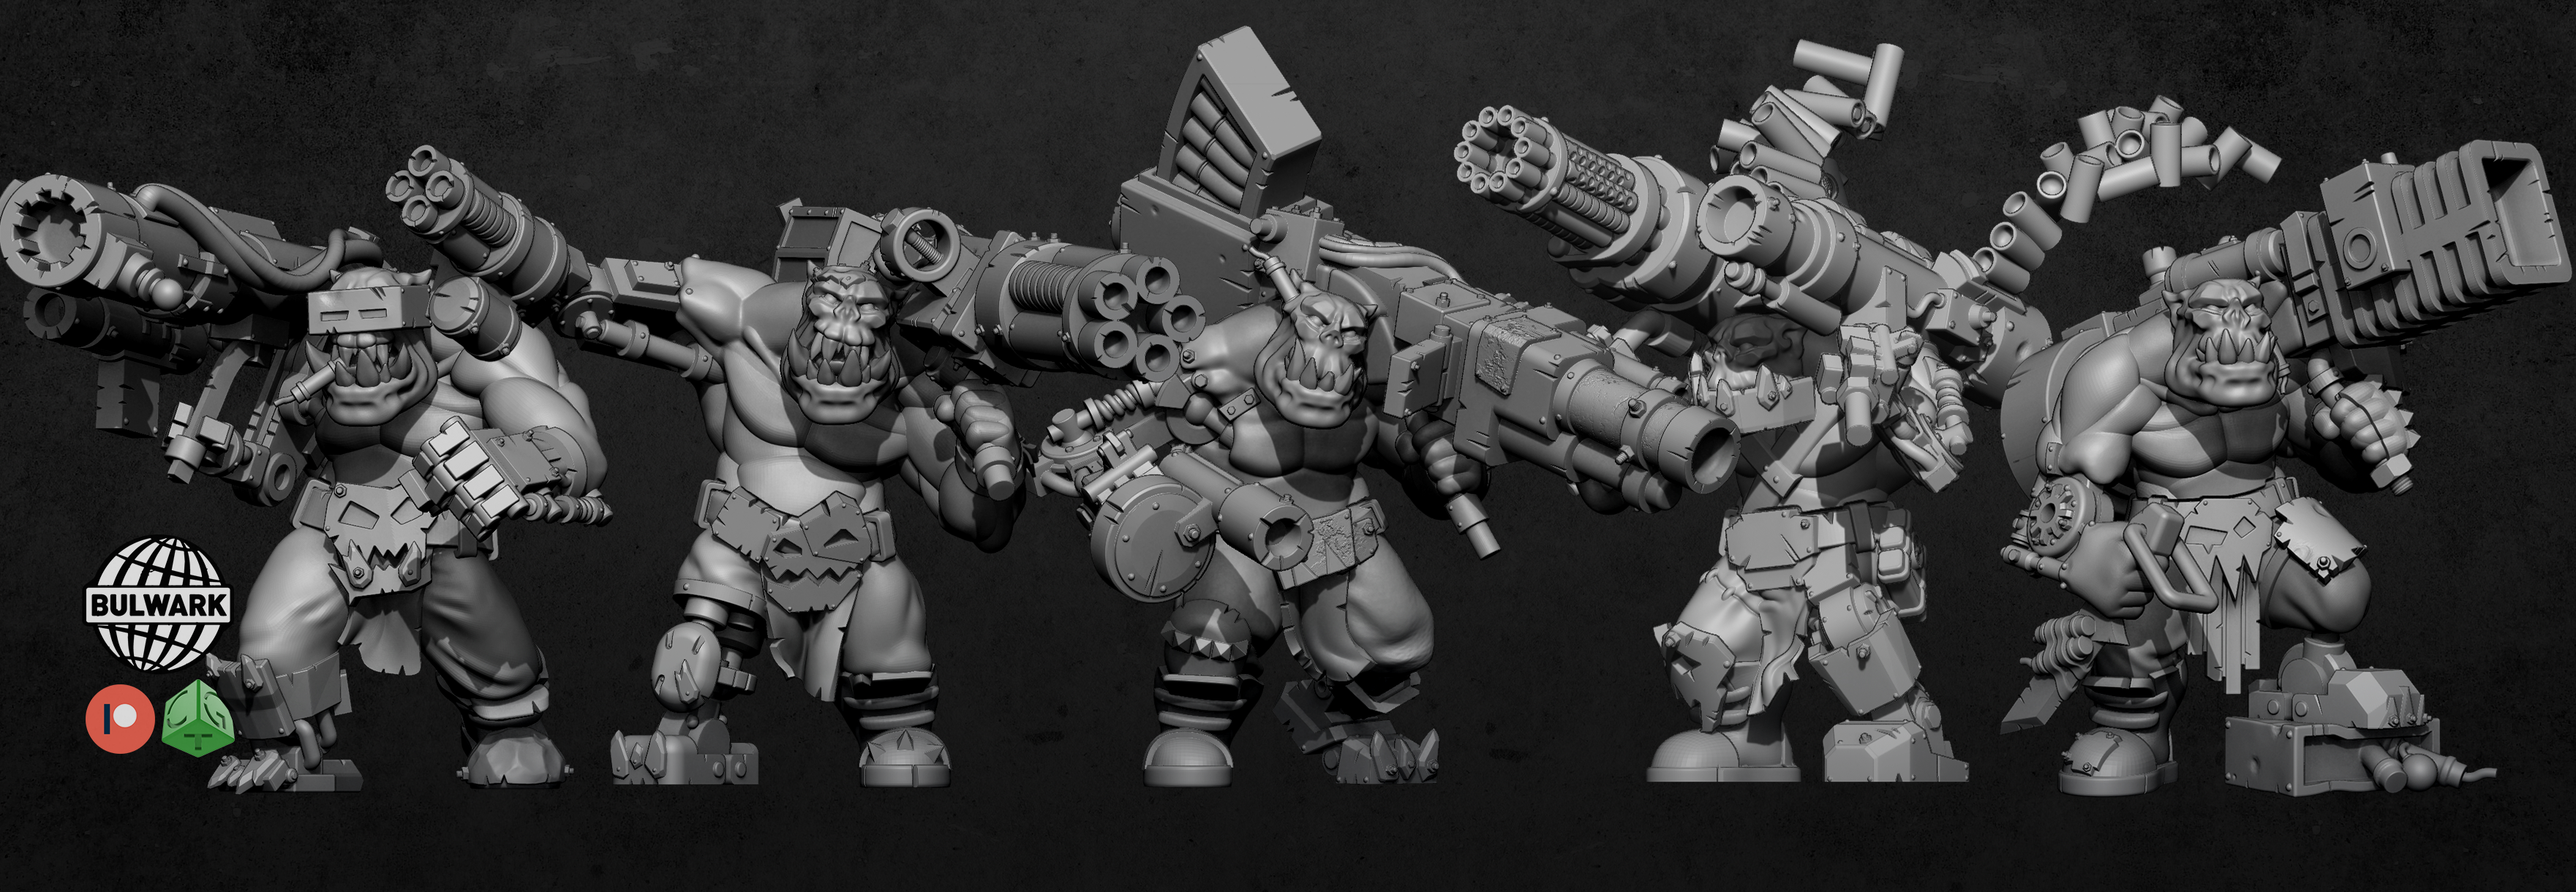 tank busters looters stl print files for 40k orks